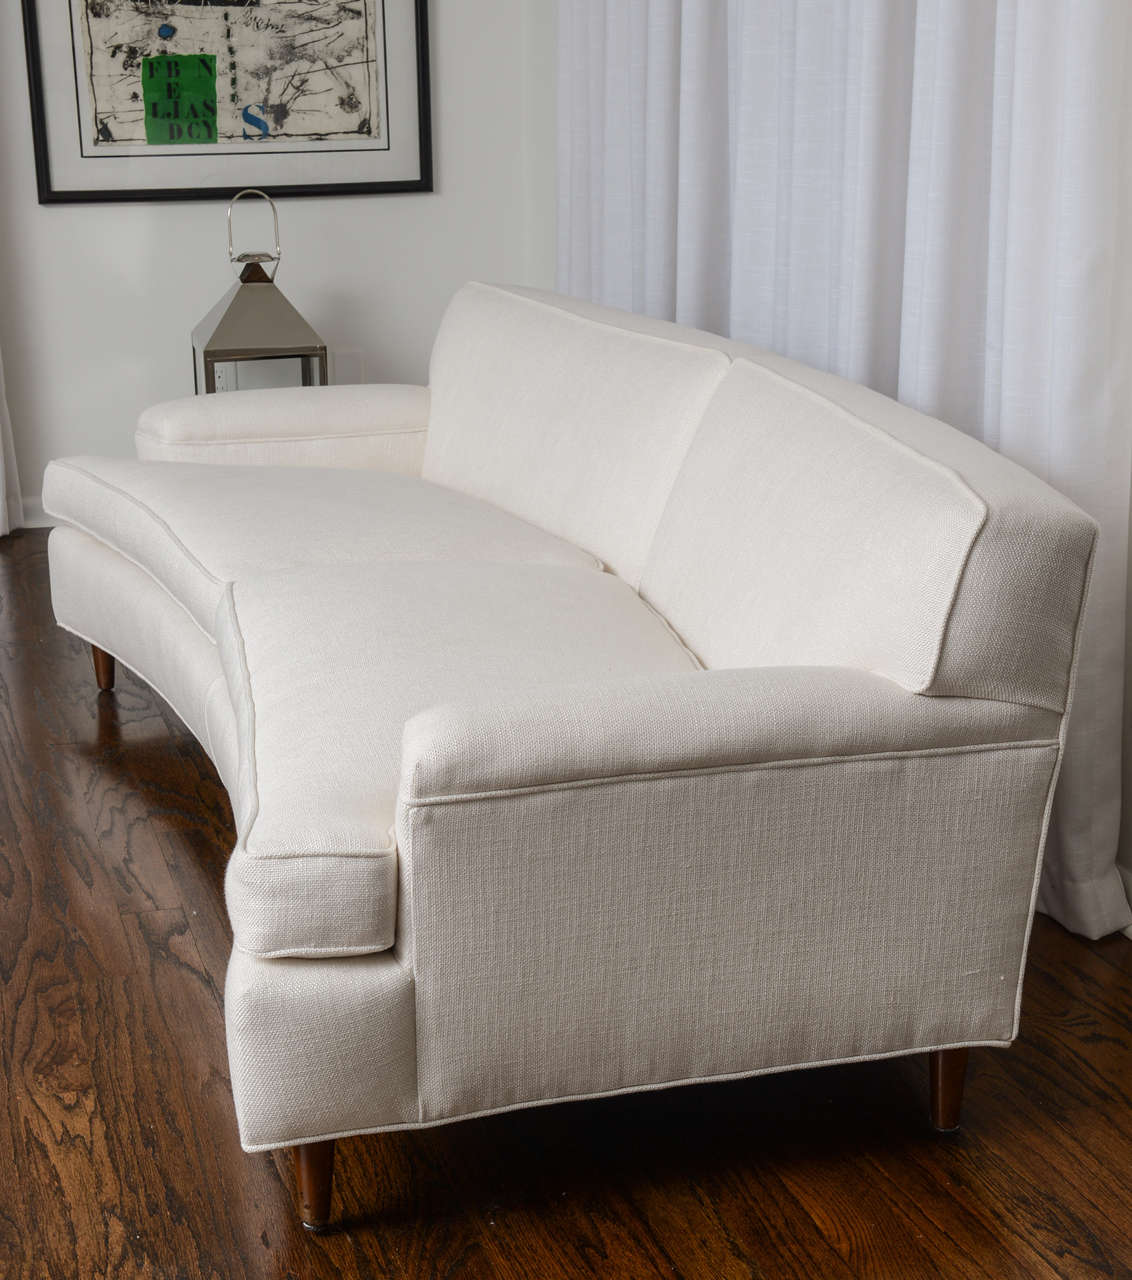 MidCentury Modern Curved Sofa in White Fabric by Edward